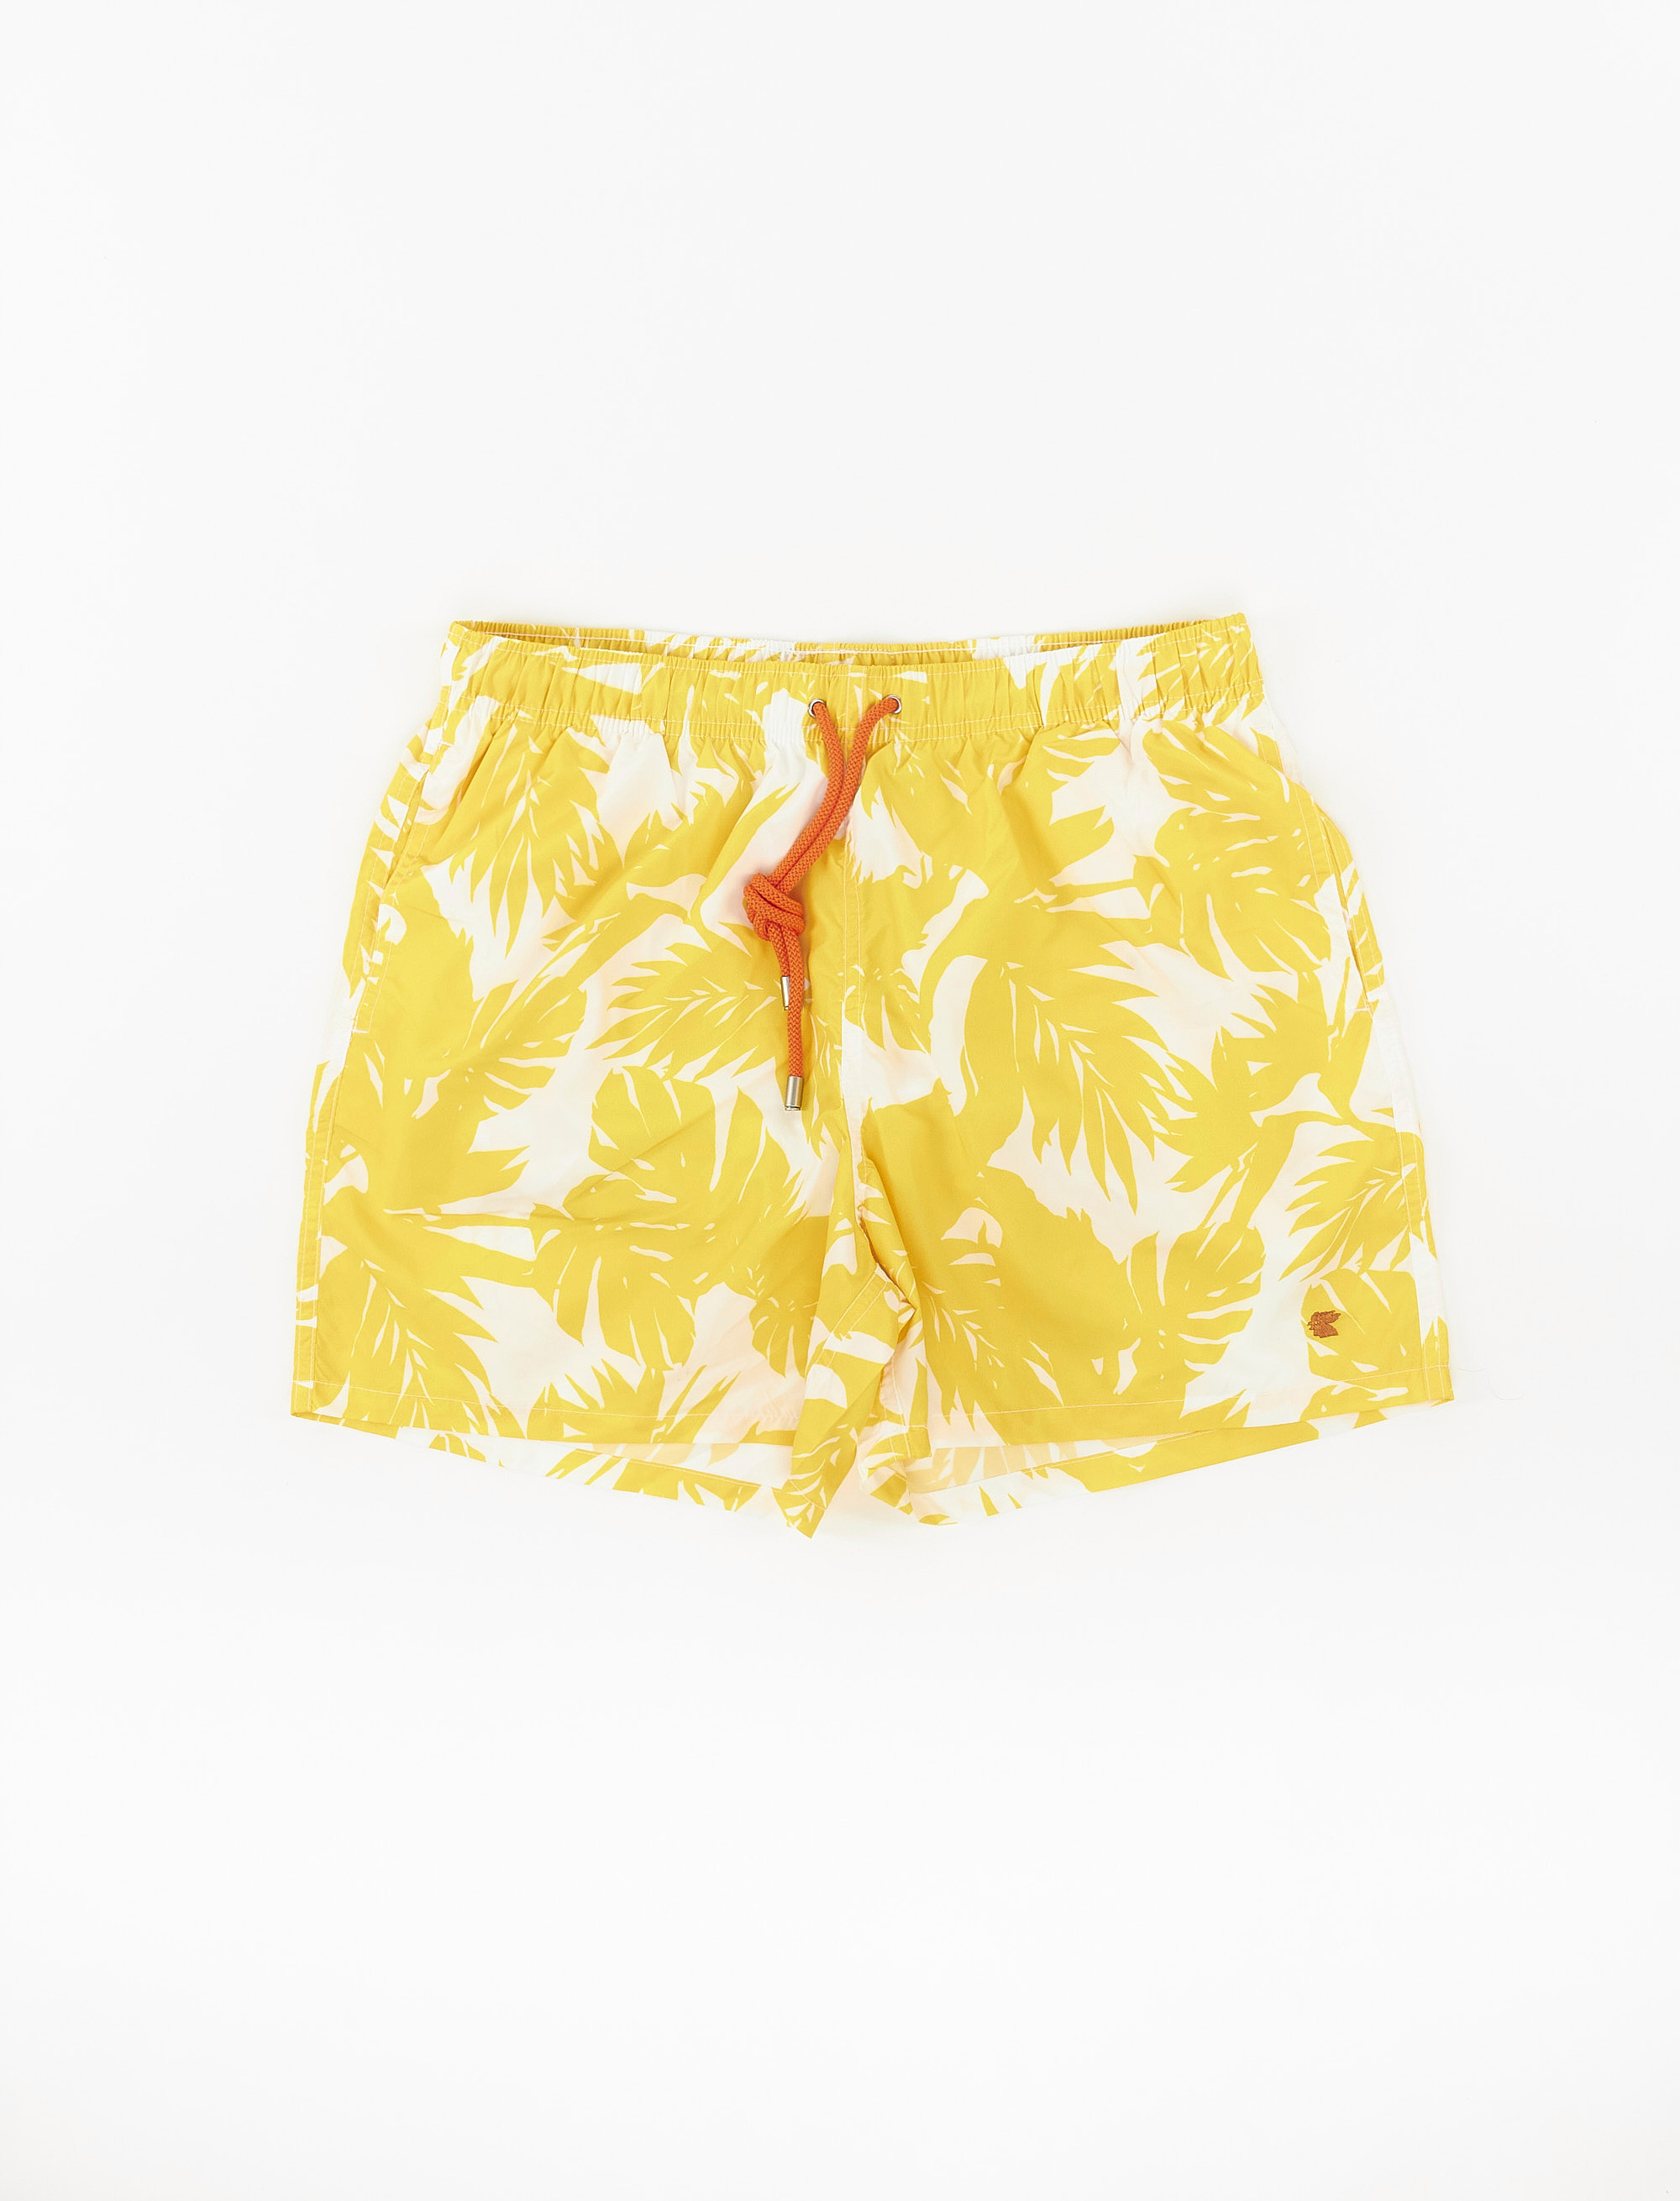 Men's polyester swimming shorts with tropical leaf motif, daffodil ...